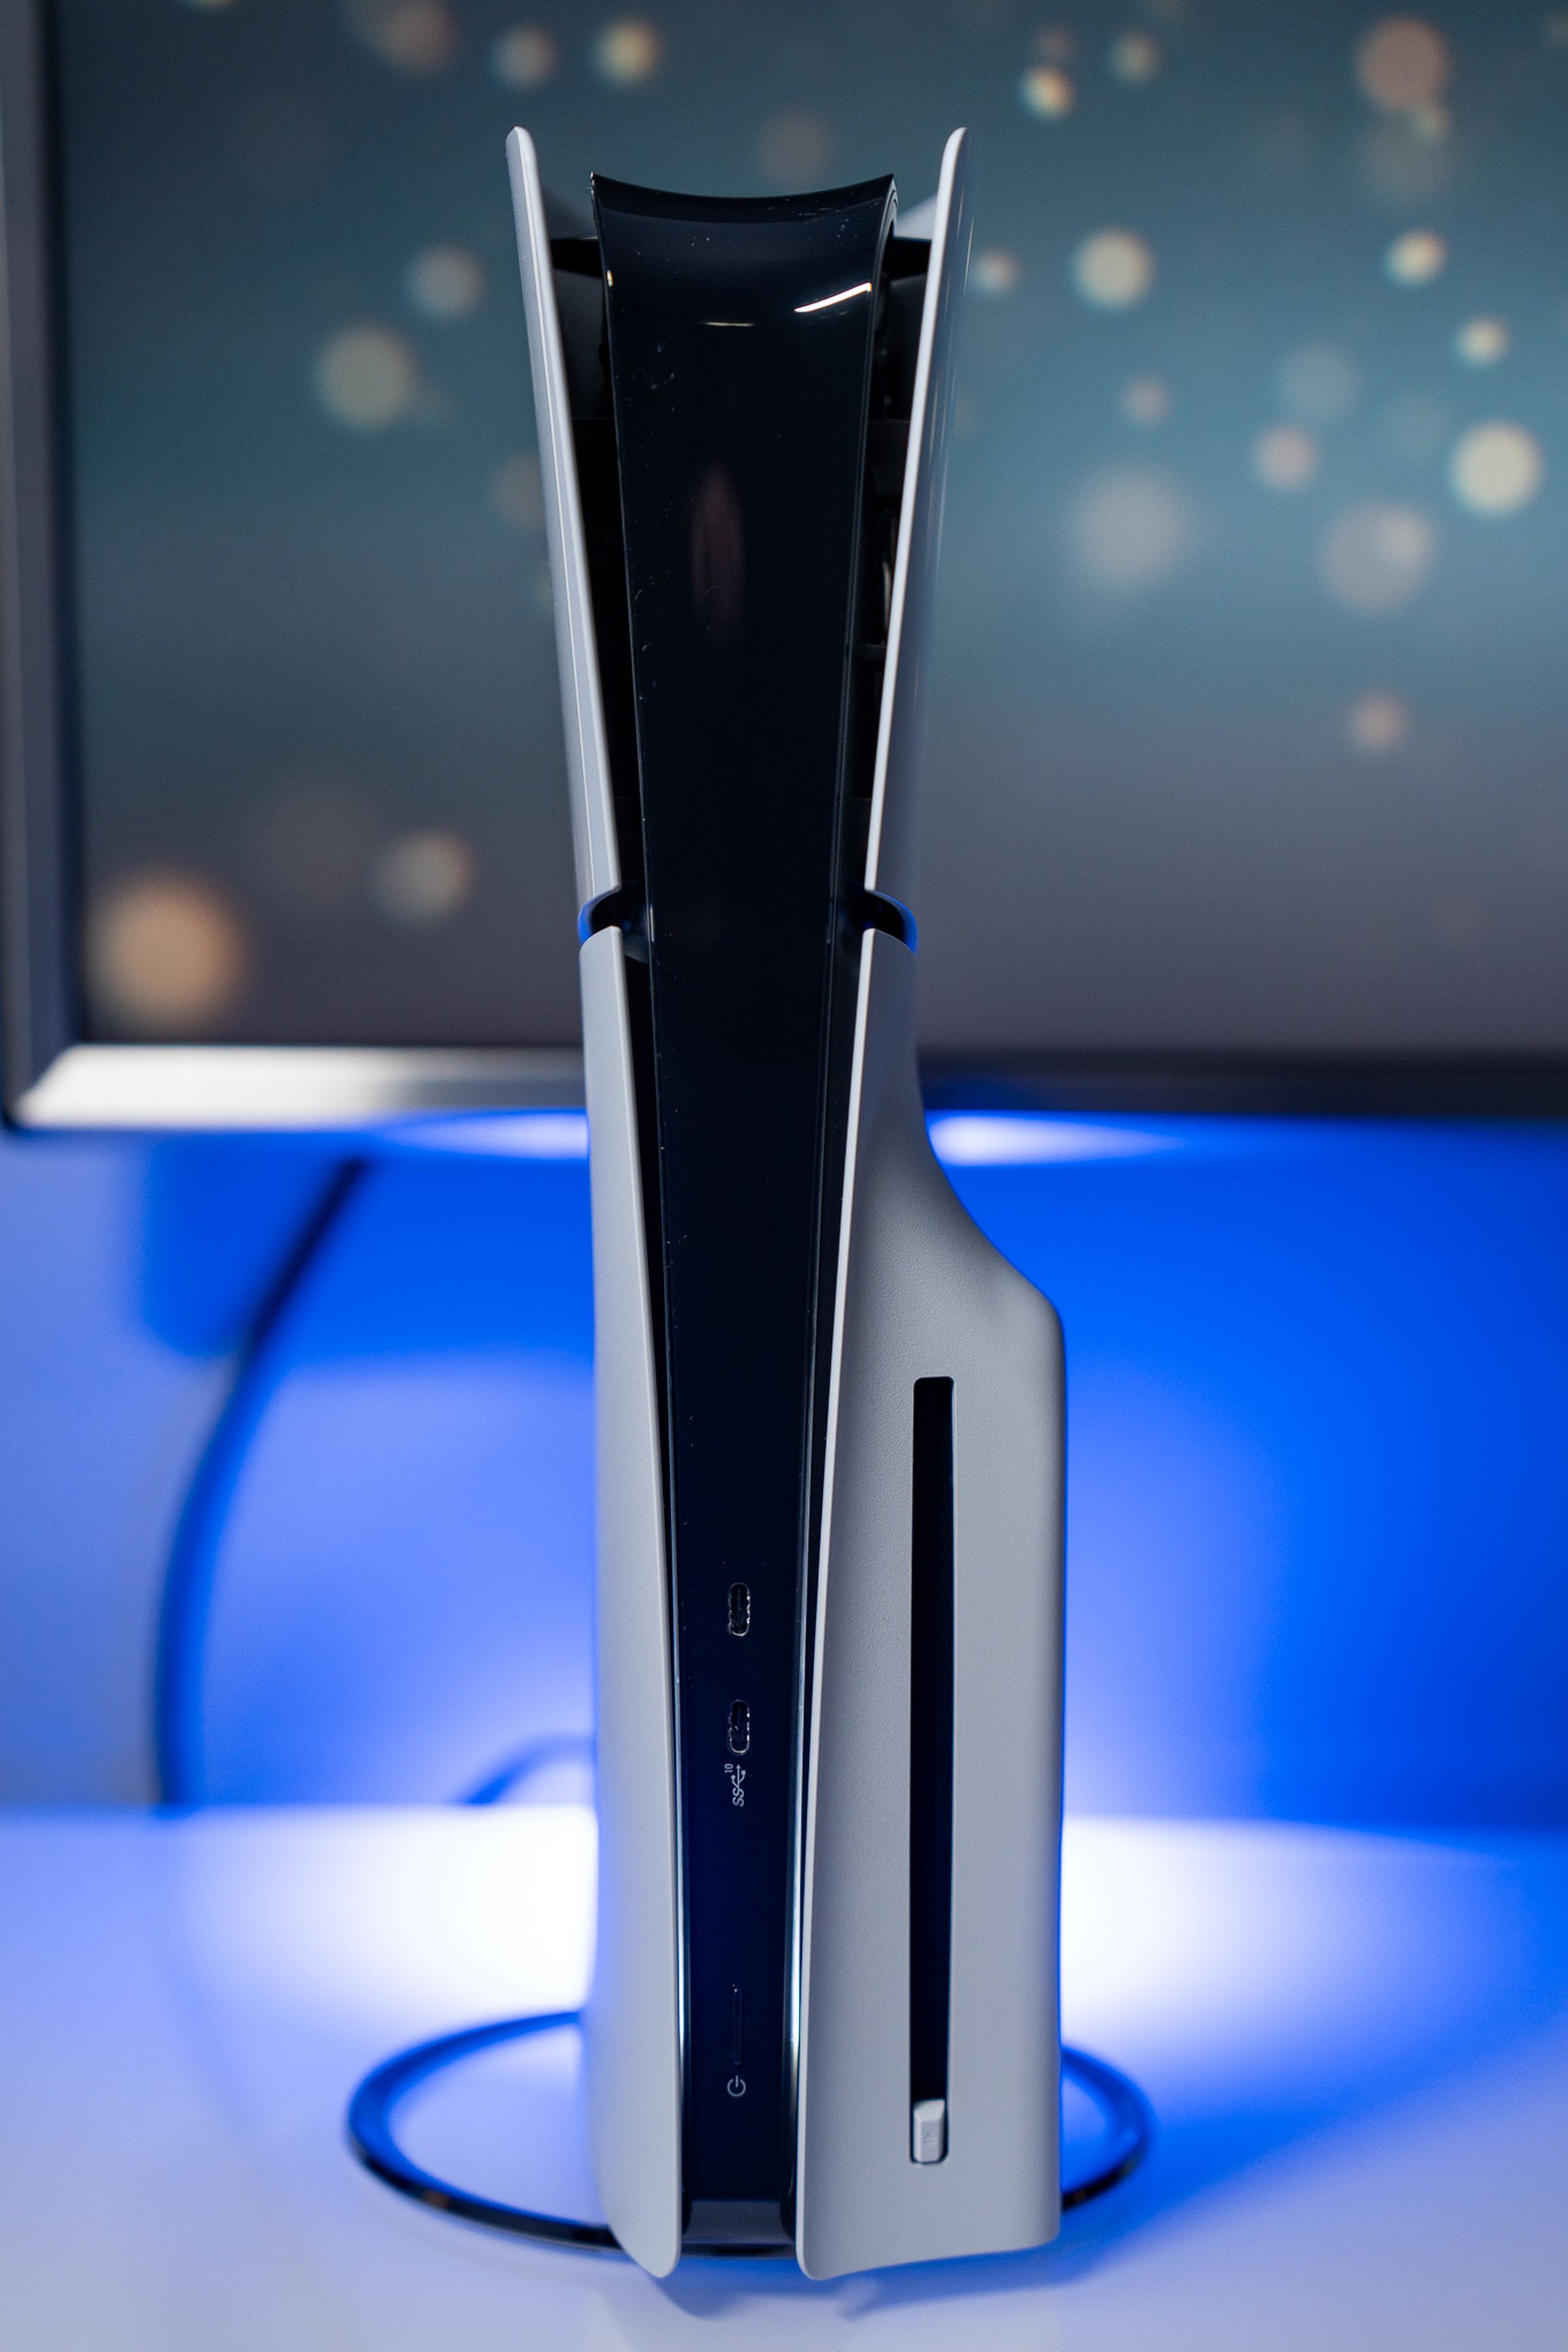 <em>Like the original PlayStation 5, the new model looks better stood up vertically — which now costs $29.99 if you want a proper stand.</em>